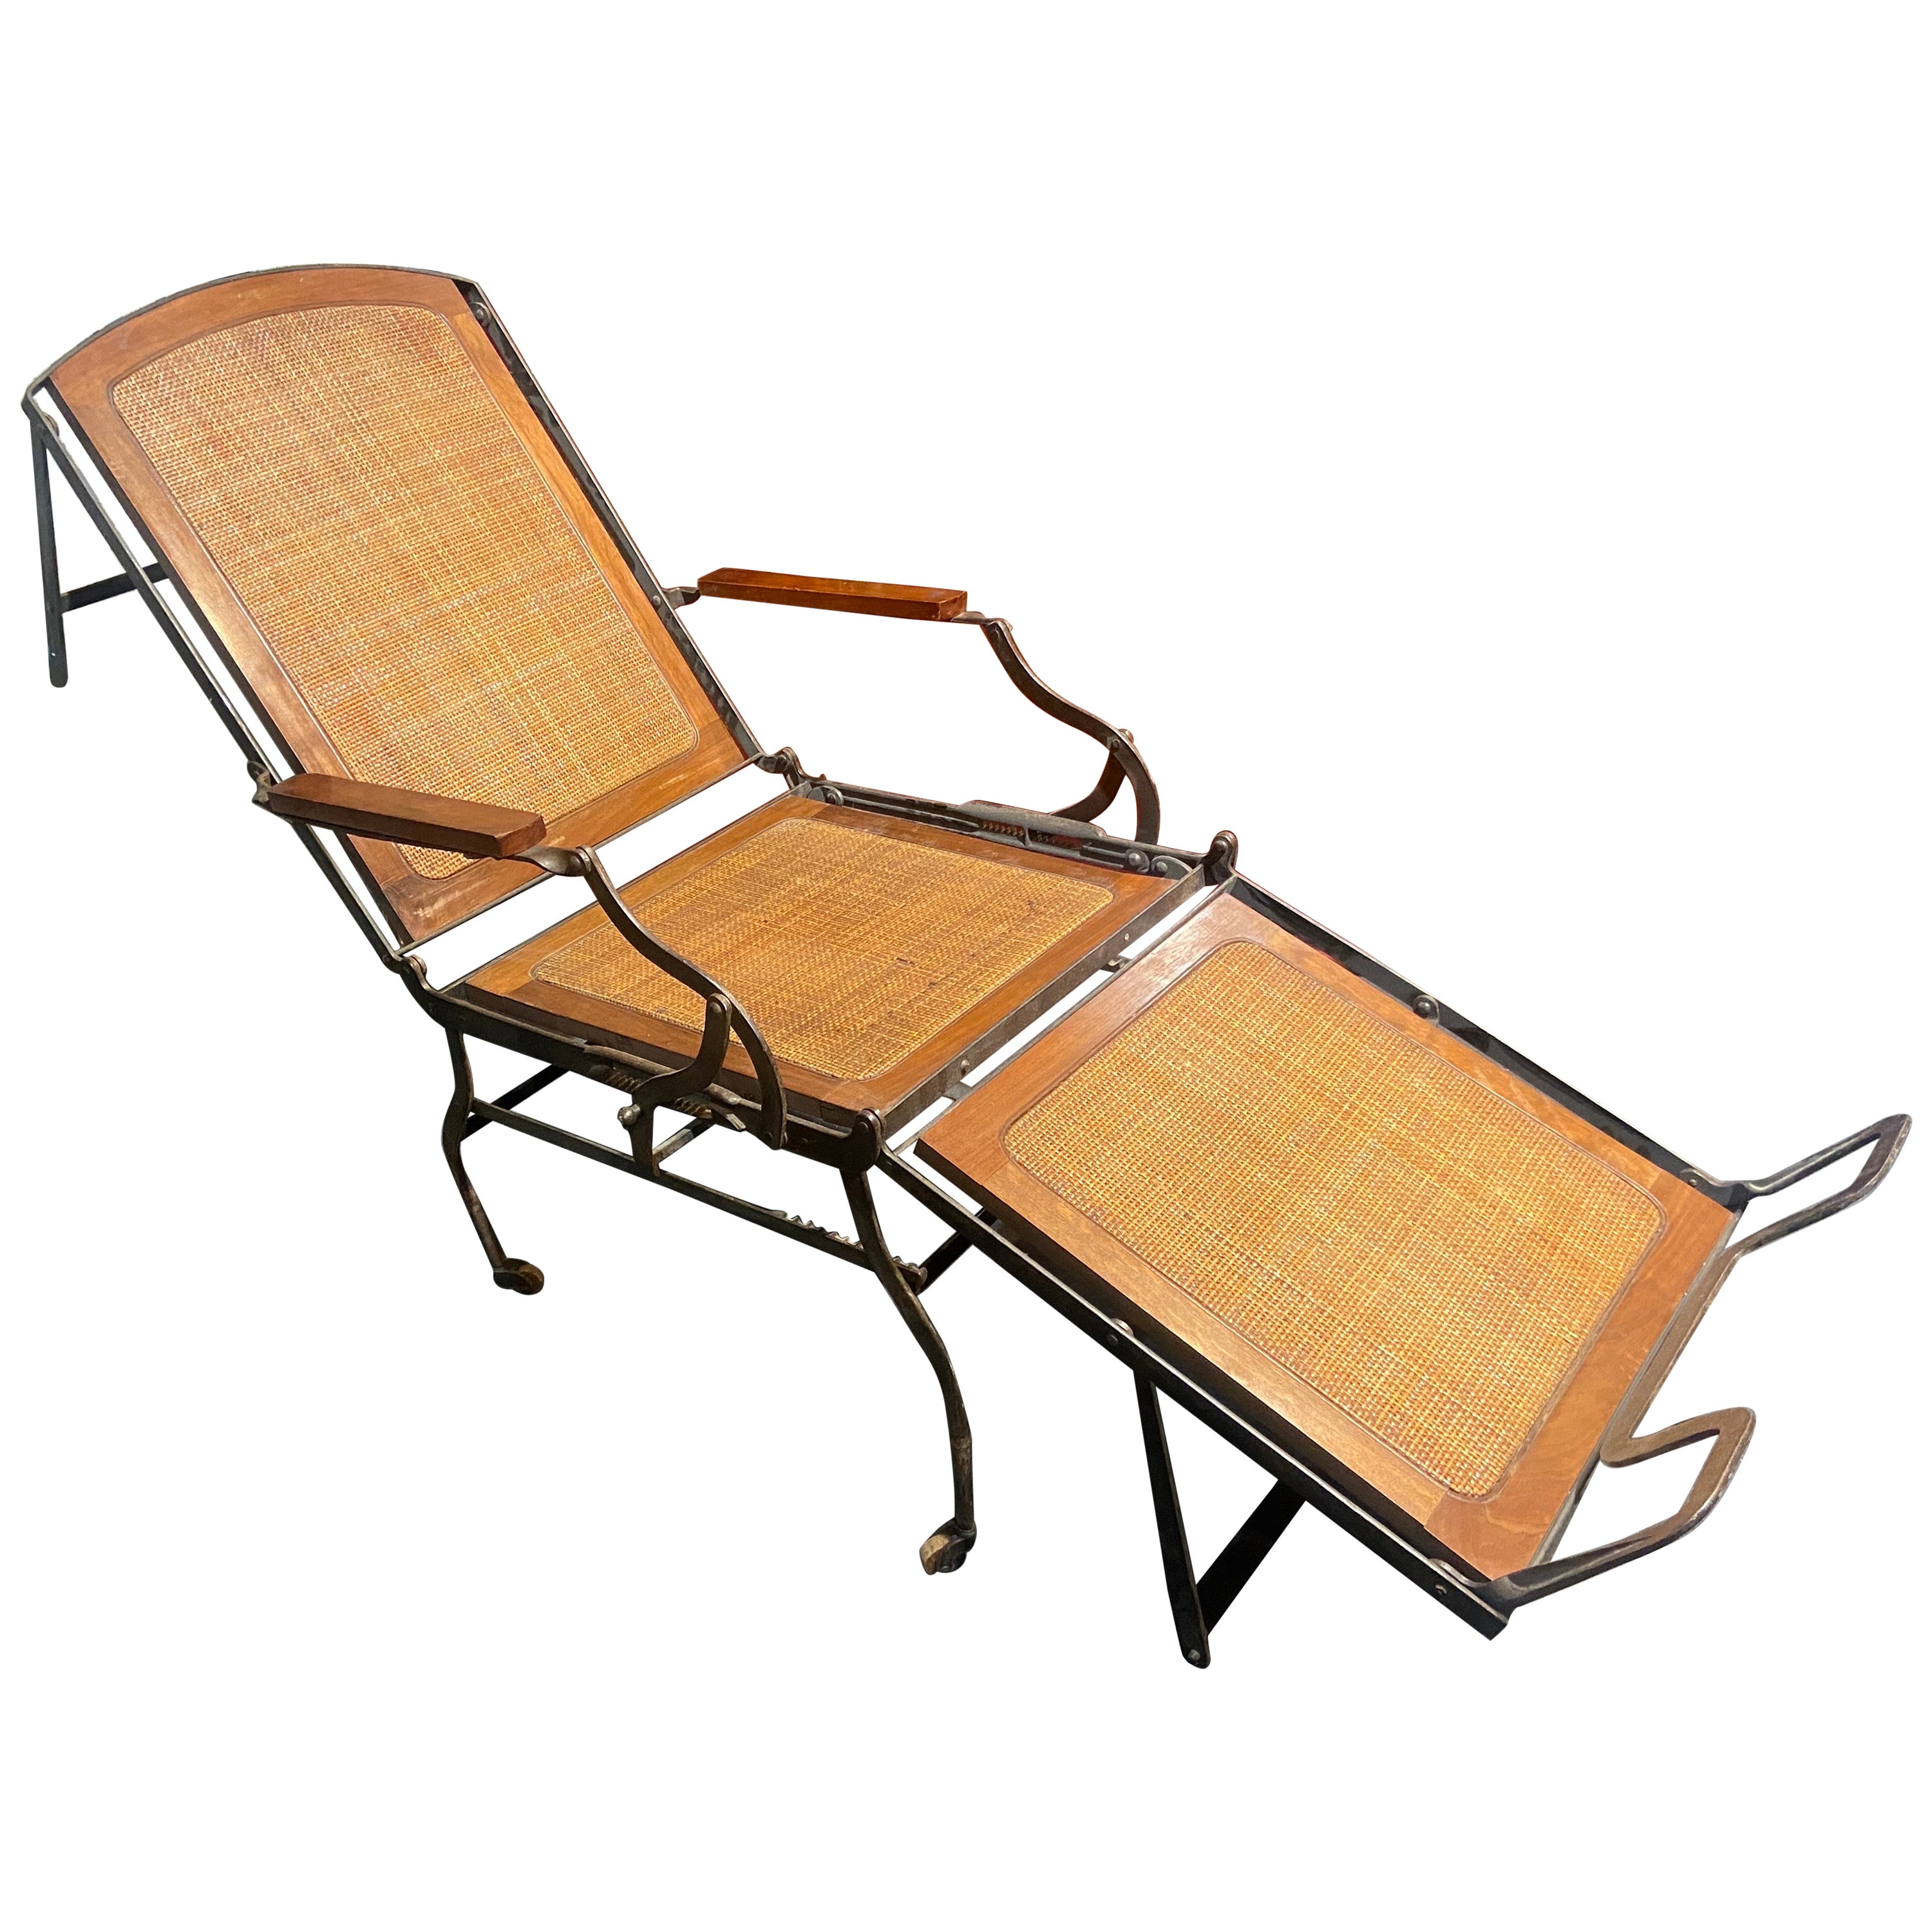 19th Century French Foldable Adjustable Iron Chaise Lounge in Cane and Wood